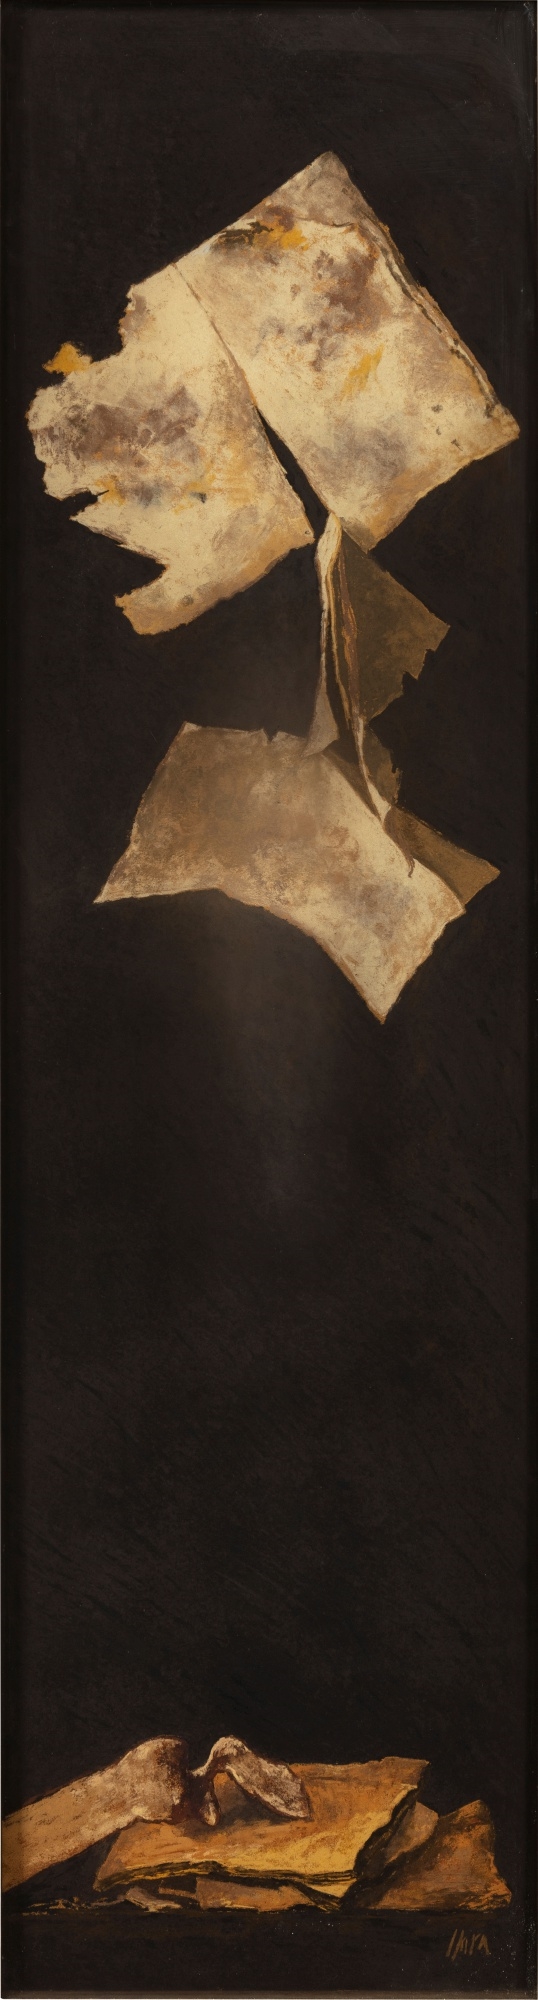 Sans titre by Pierre Skira, dated 1993